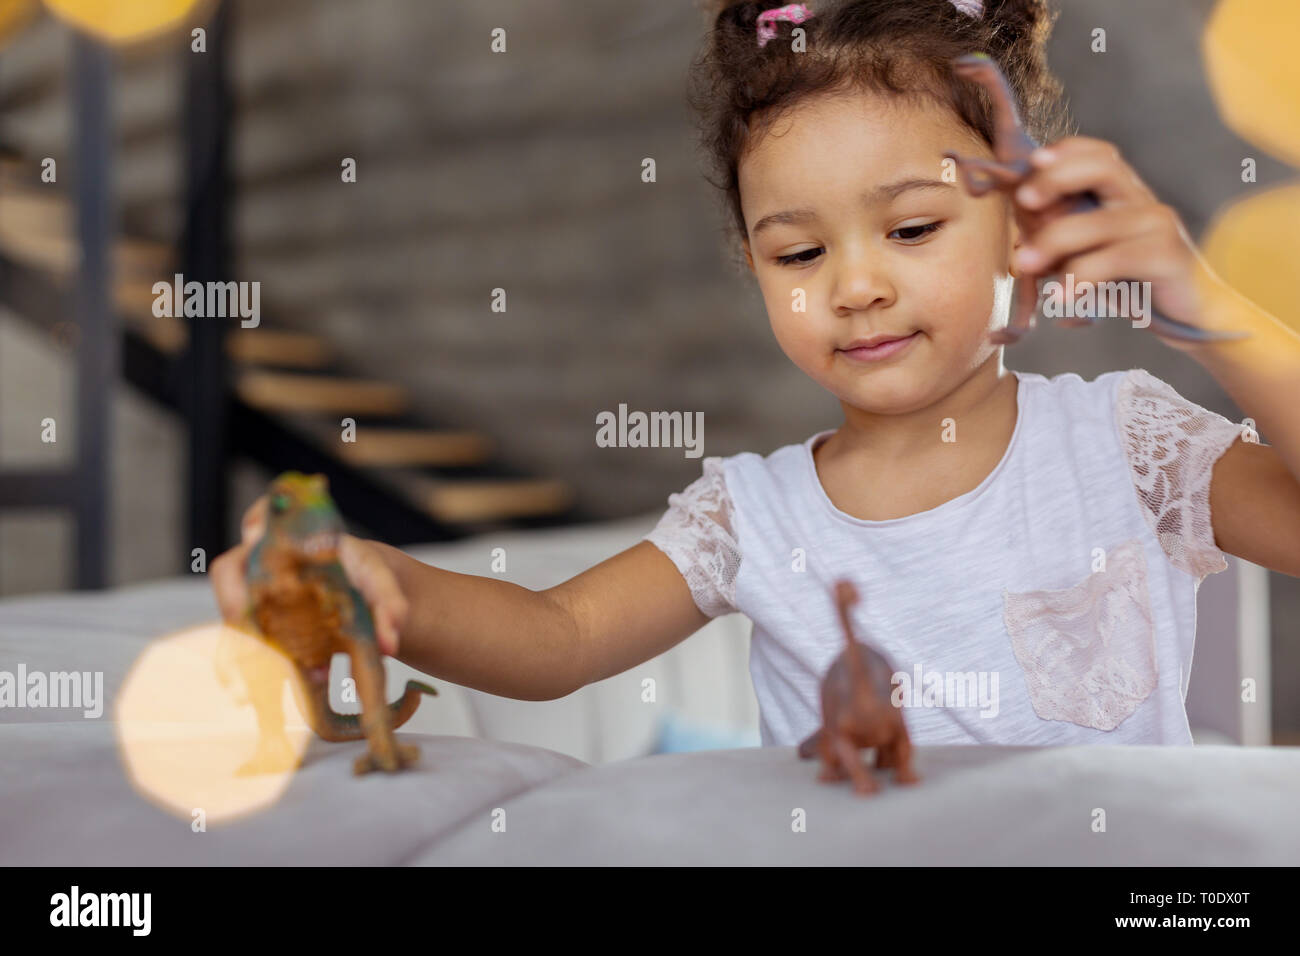 Pleased curly-haired child looking at her toys Stock Photo